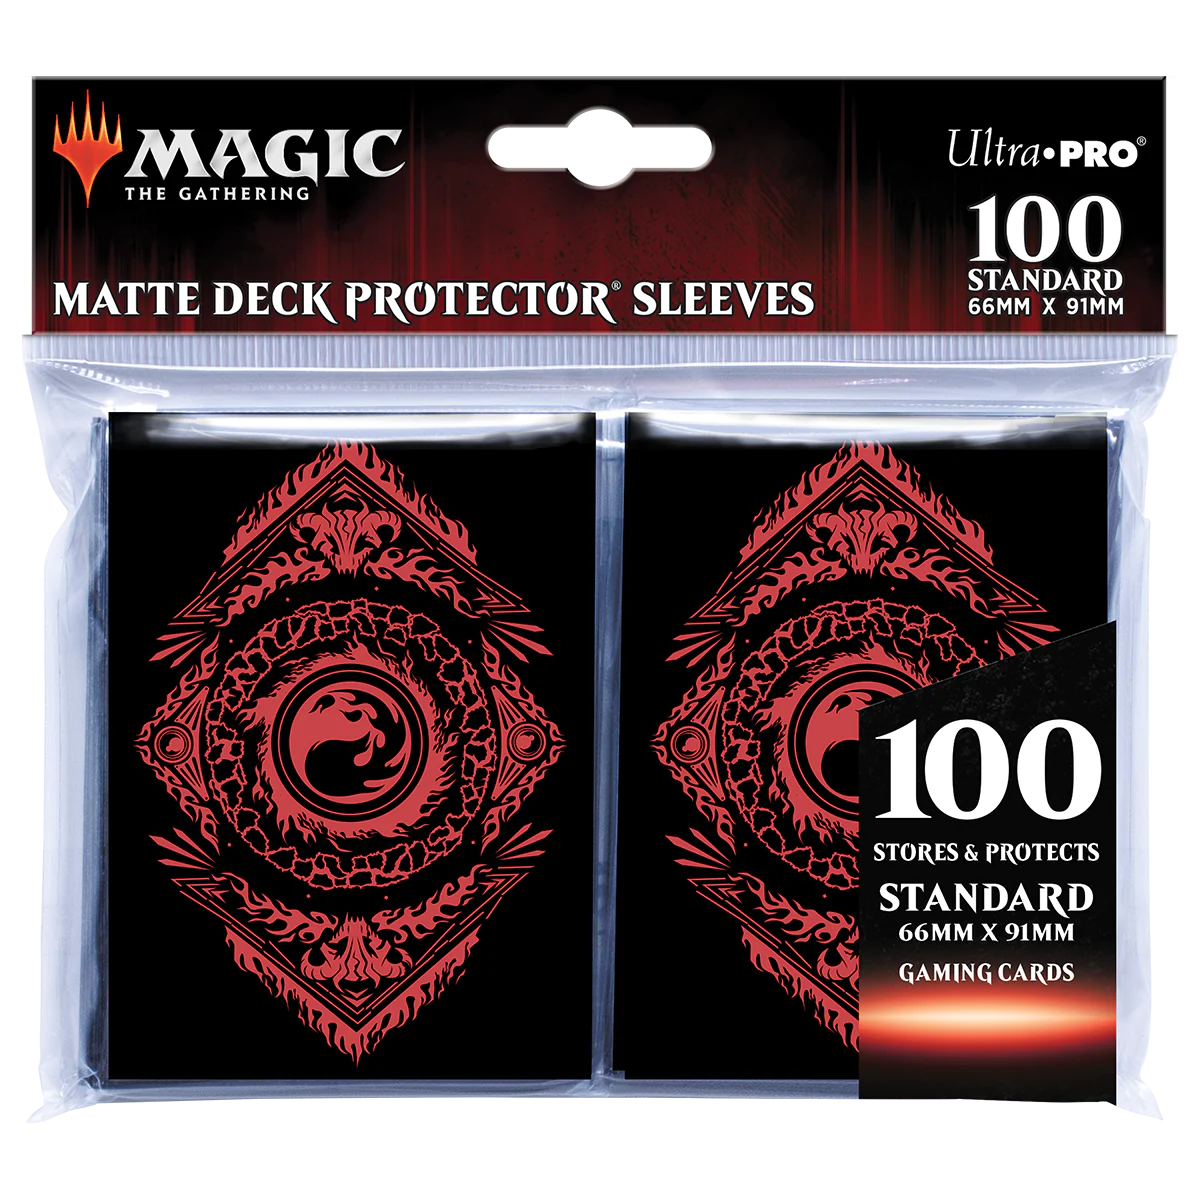 Mana 7 Mountain Deck Protector Sleeves (100ct)